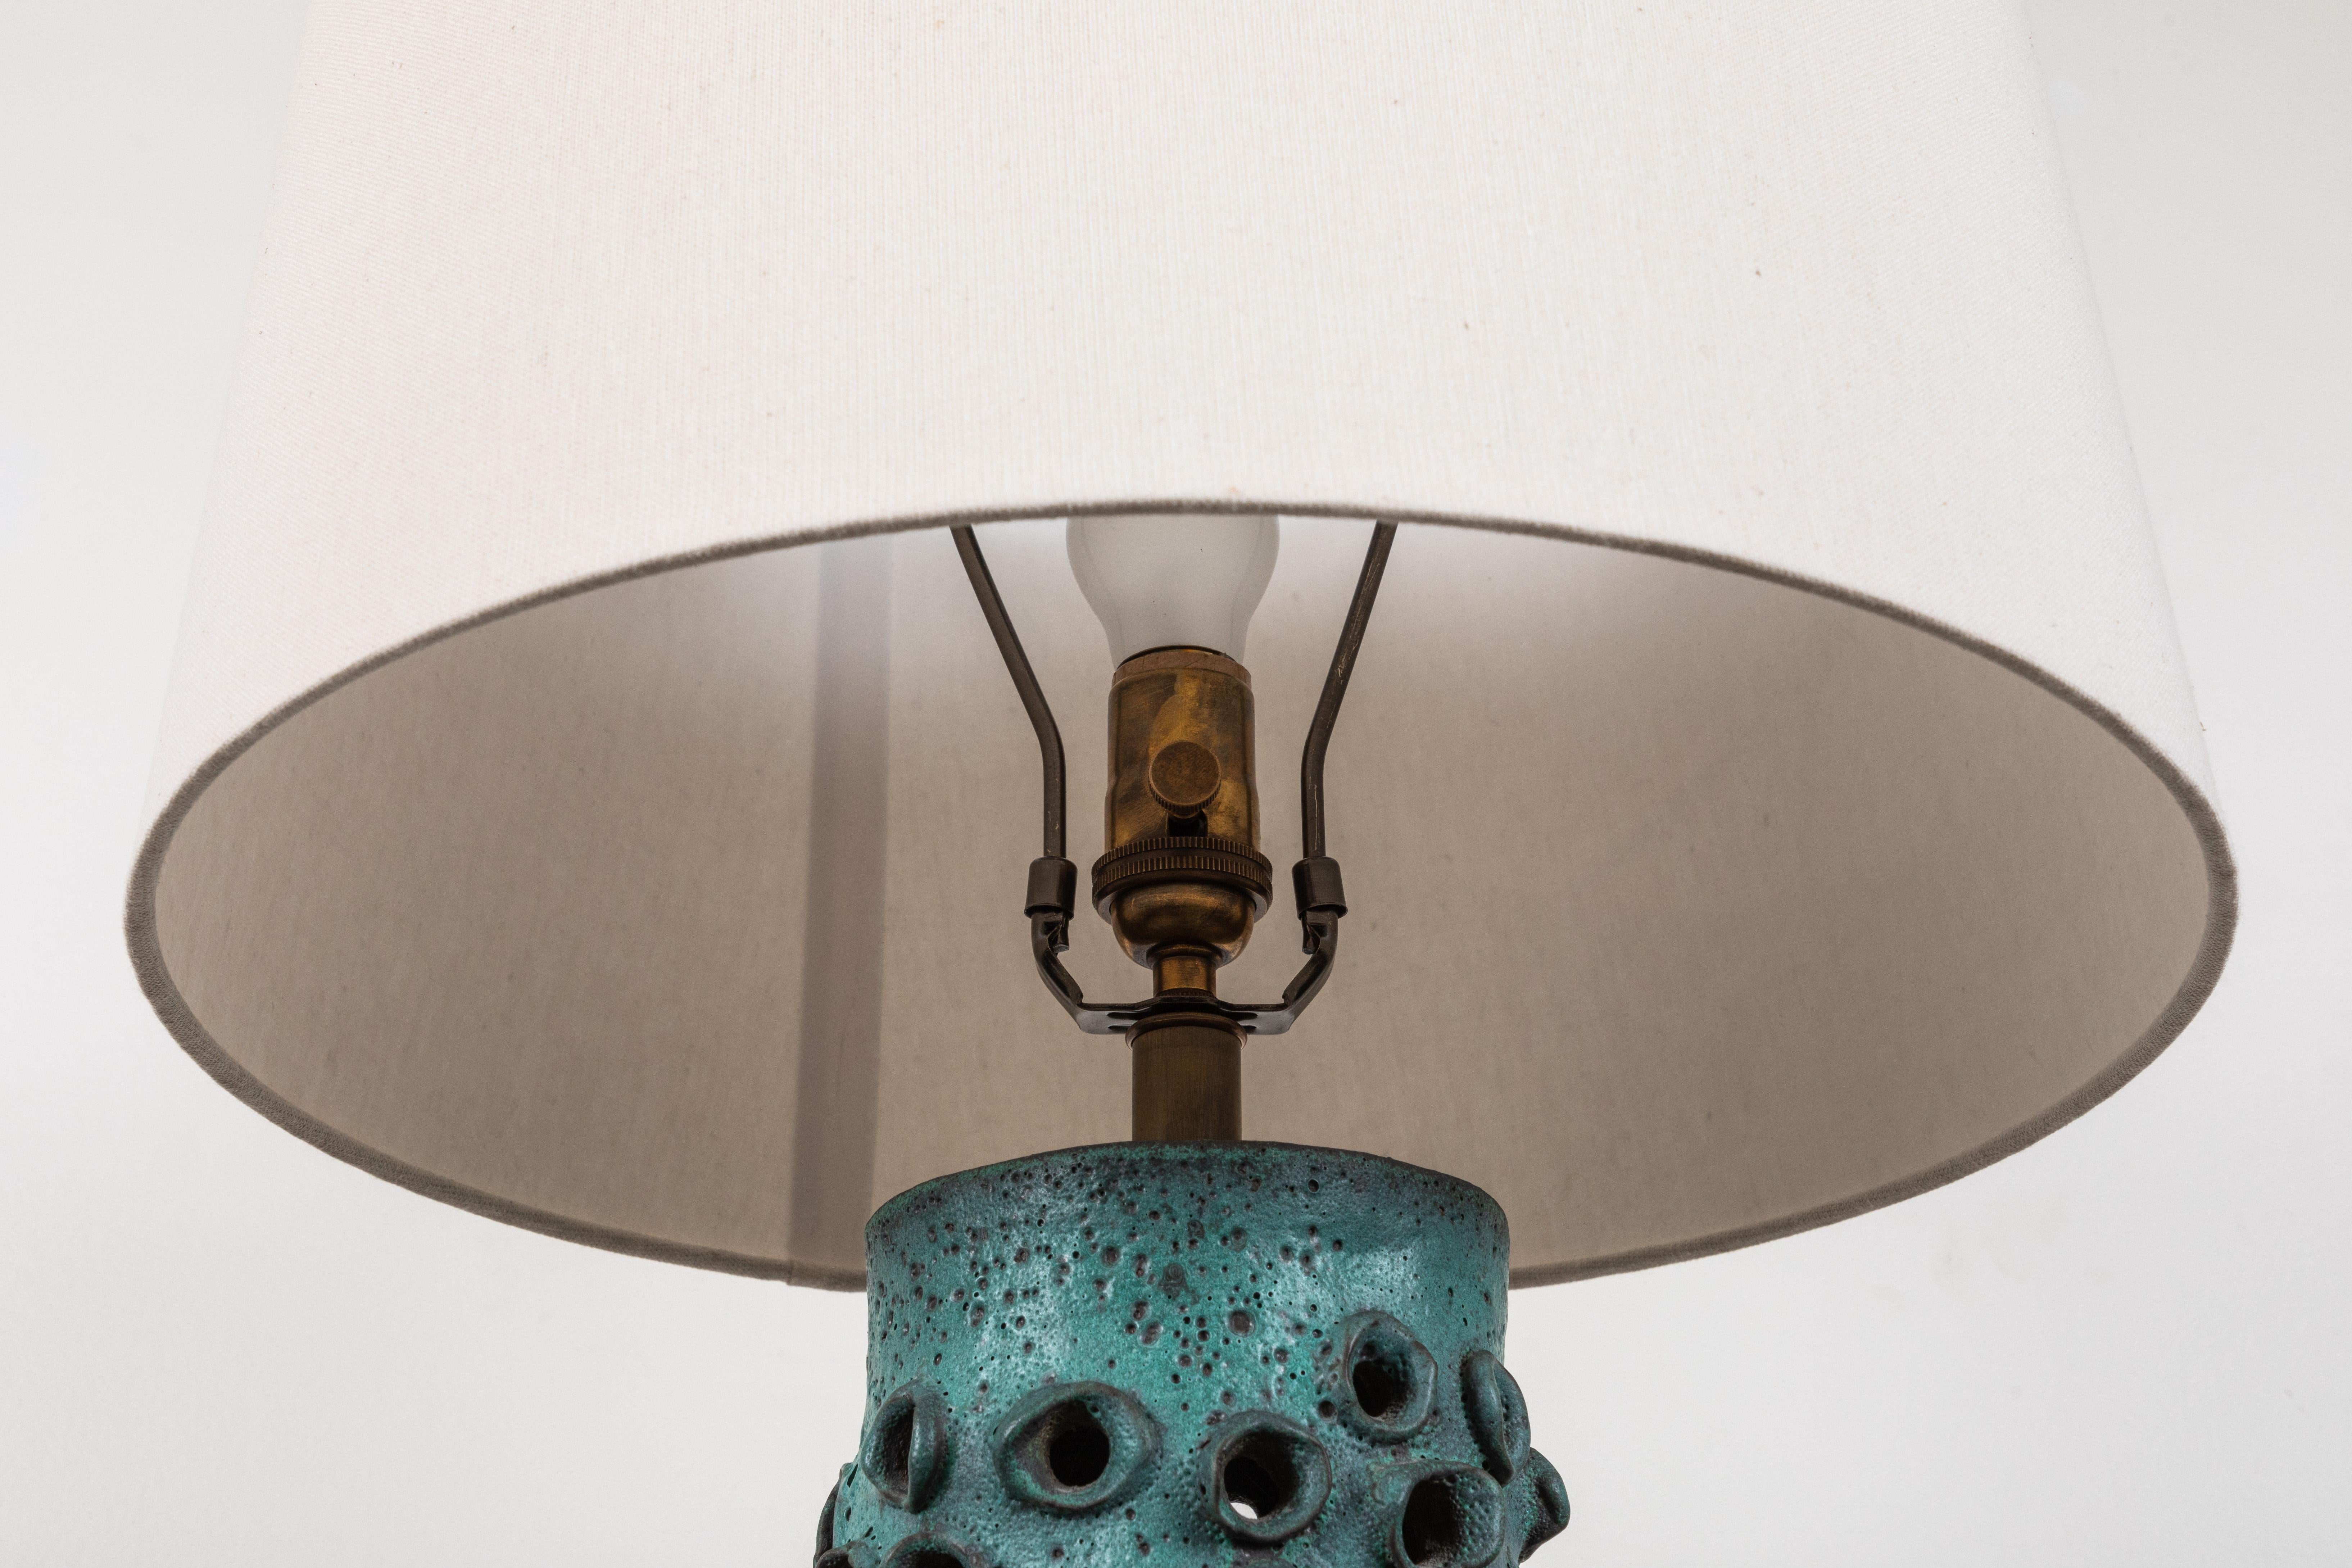 Mid-Century Modern Trafitto Table Lamp by Magnolia Ceramics for Lawson-Fenning